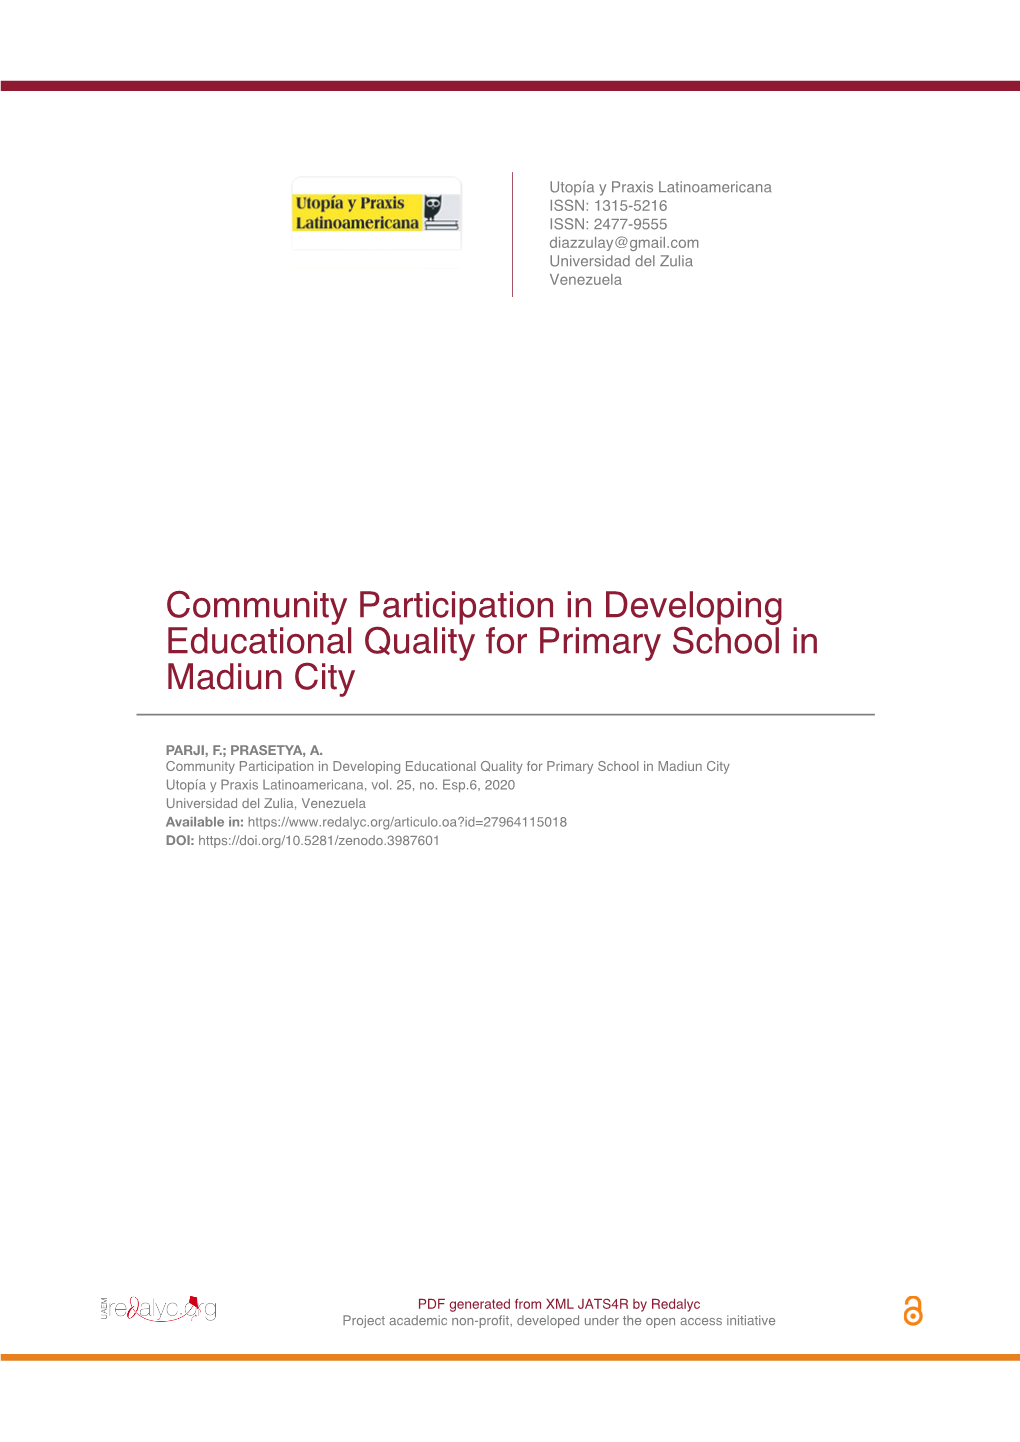 Community Participation in Developing Educational Quality for Primary School in Madiun City